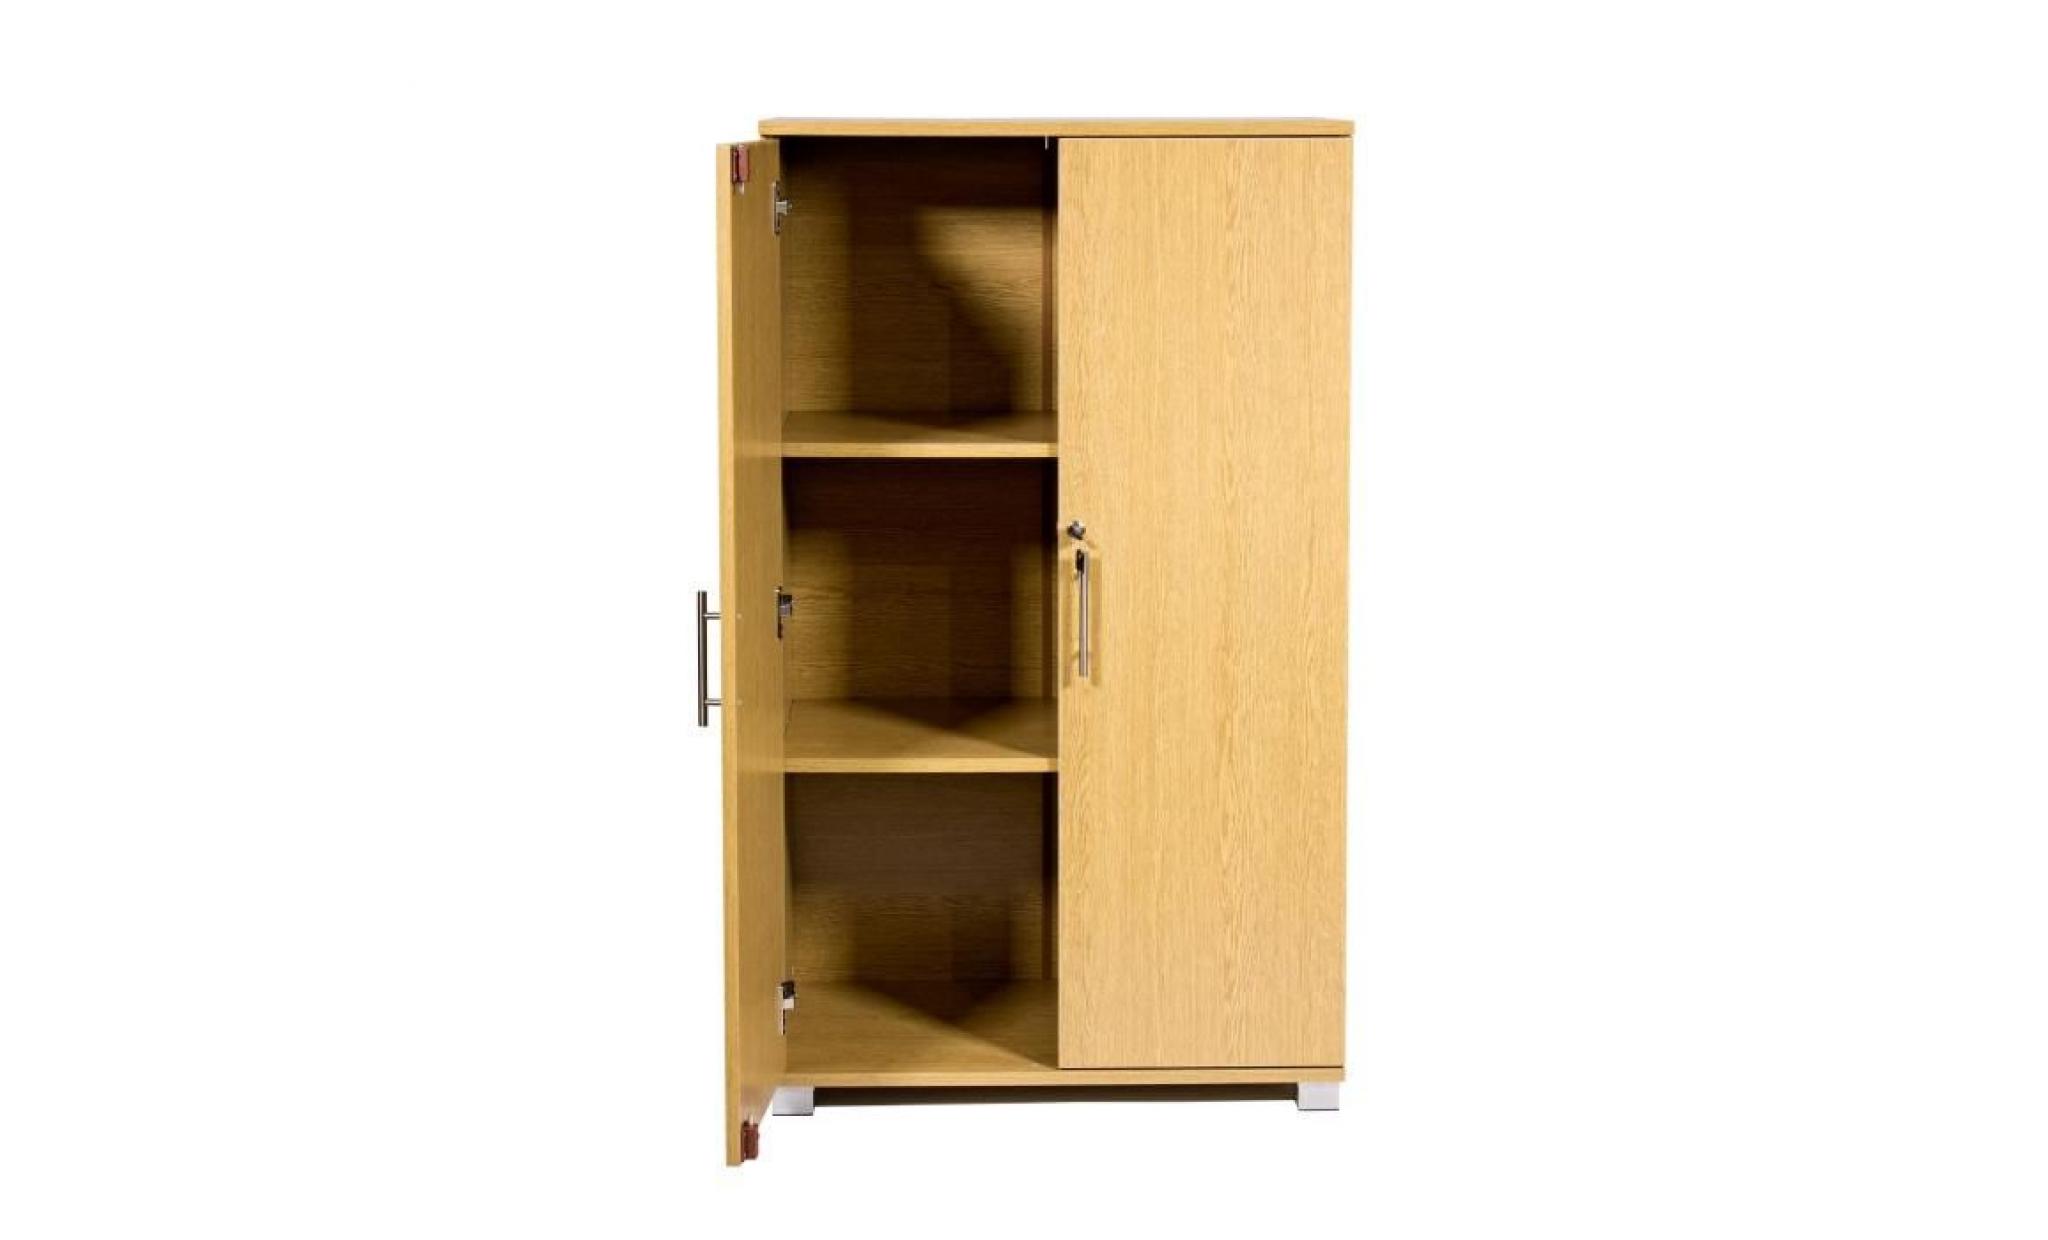 mmt sd iv04lockable storage cupboard filing cabinet 120cm tall pas cher